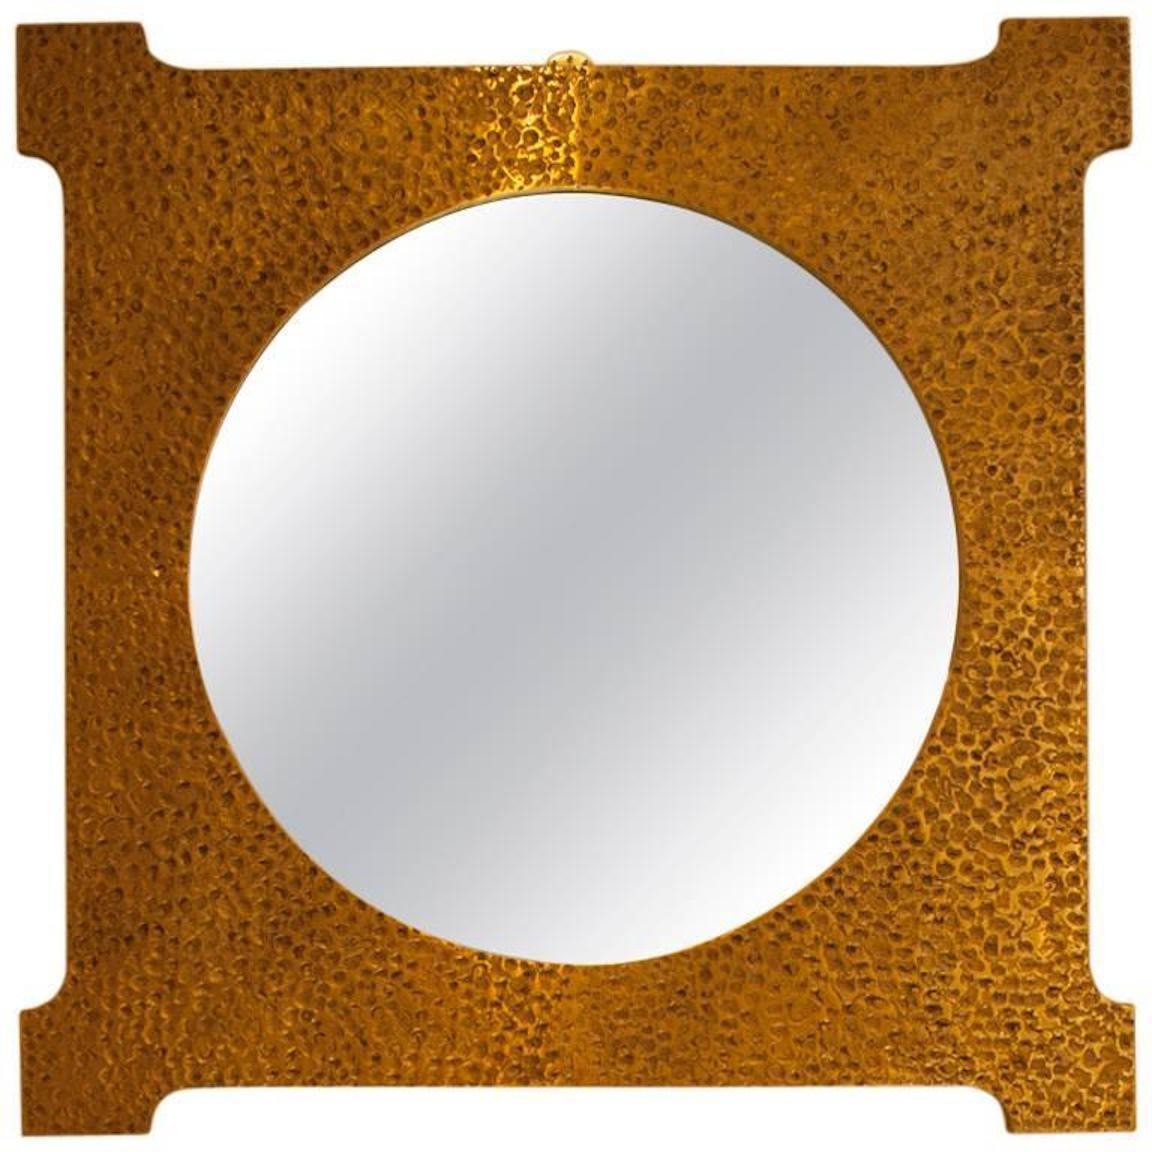 Large-scale Italian cast bronze mirror attributed to Luciano Frigerio. Mirror features hand-hammered square bronze frame and circular center mirror.
  